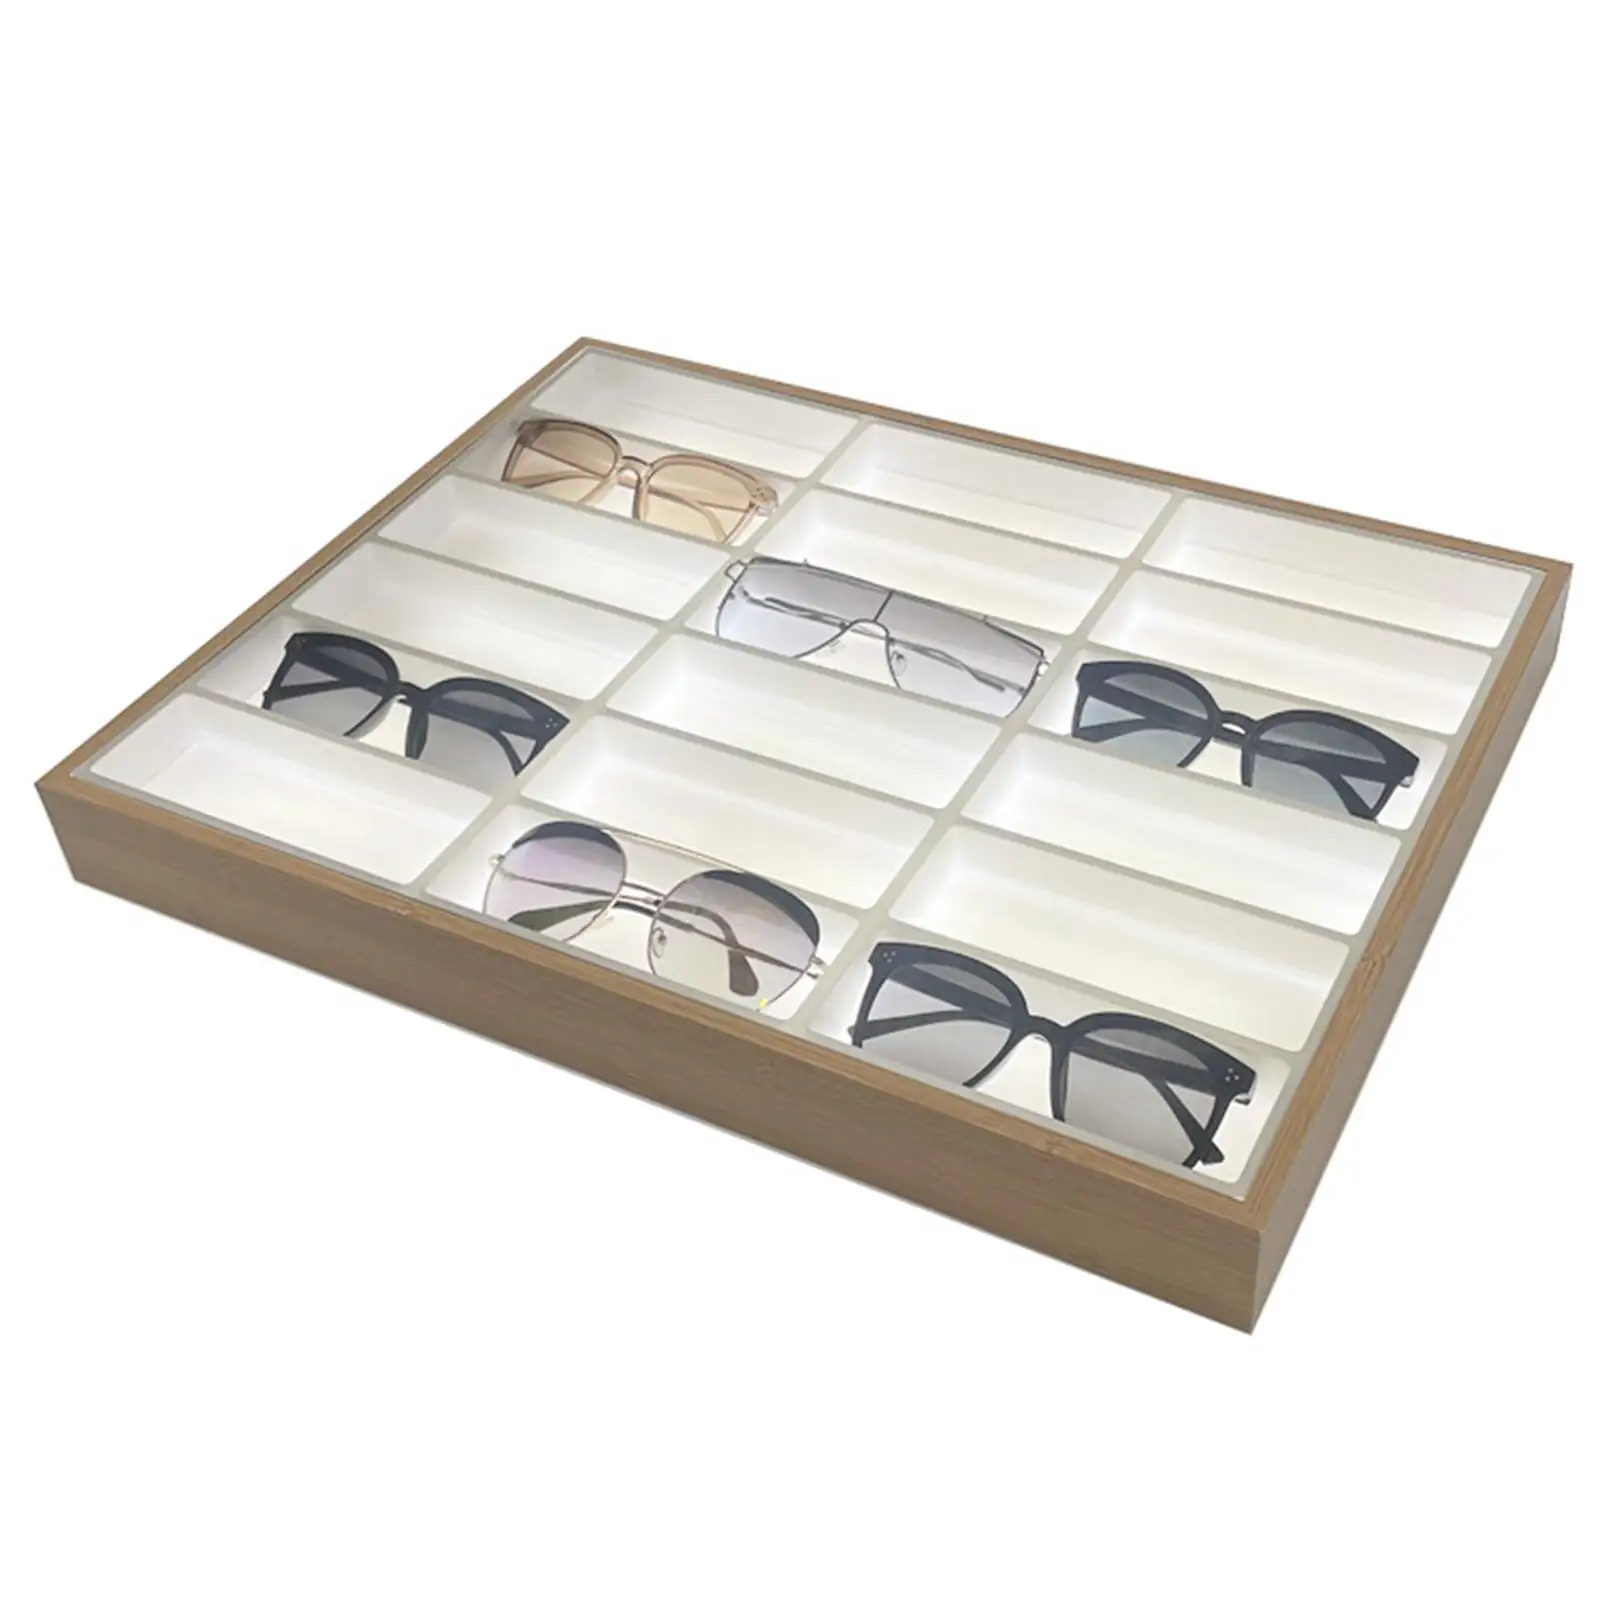 Glasses Display Tray Large Capacity 18 Grids Multipurpose Storage Case for Eyeglass Bracelet Store Countertop Home Personal Use